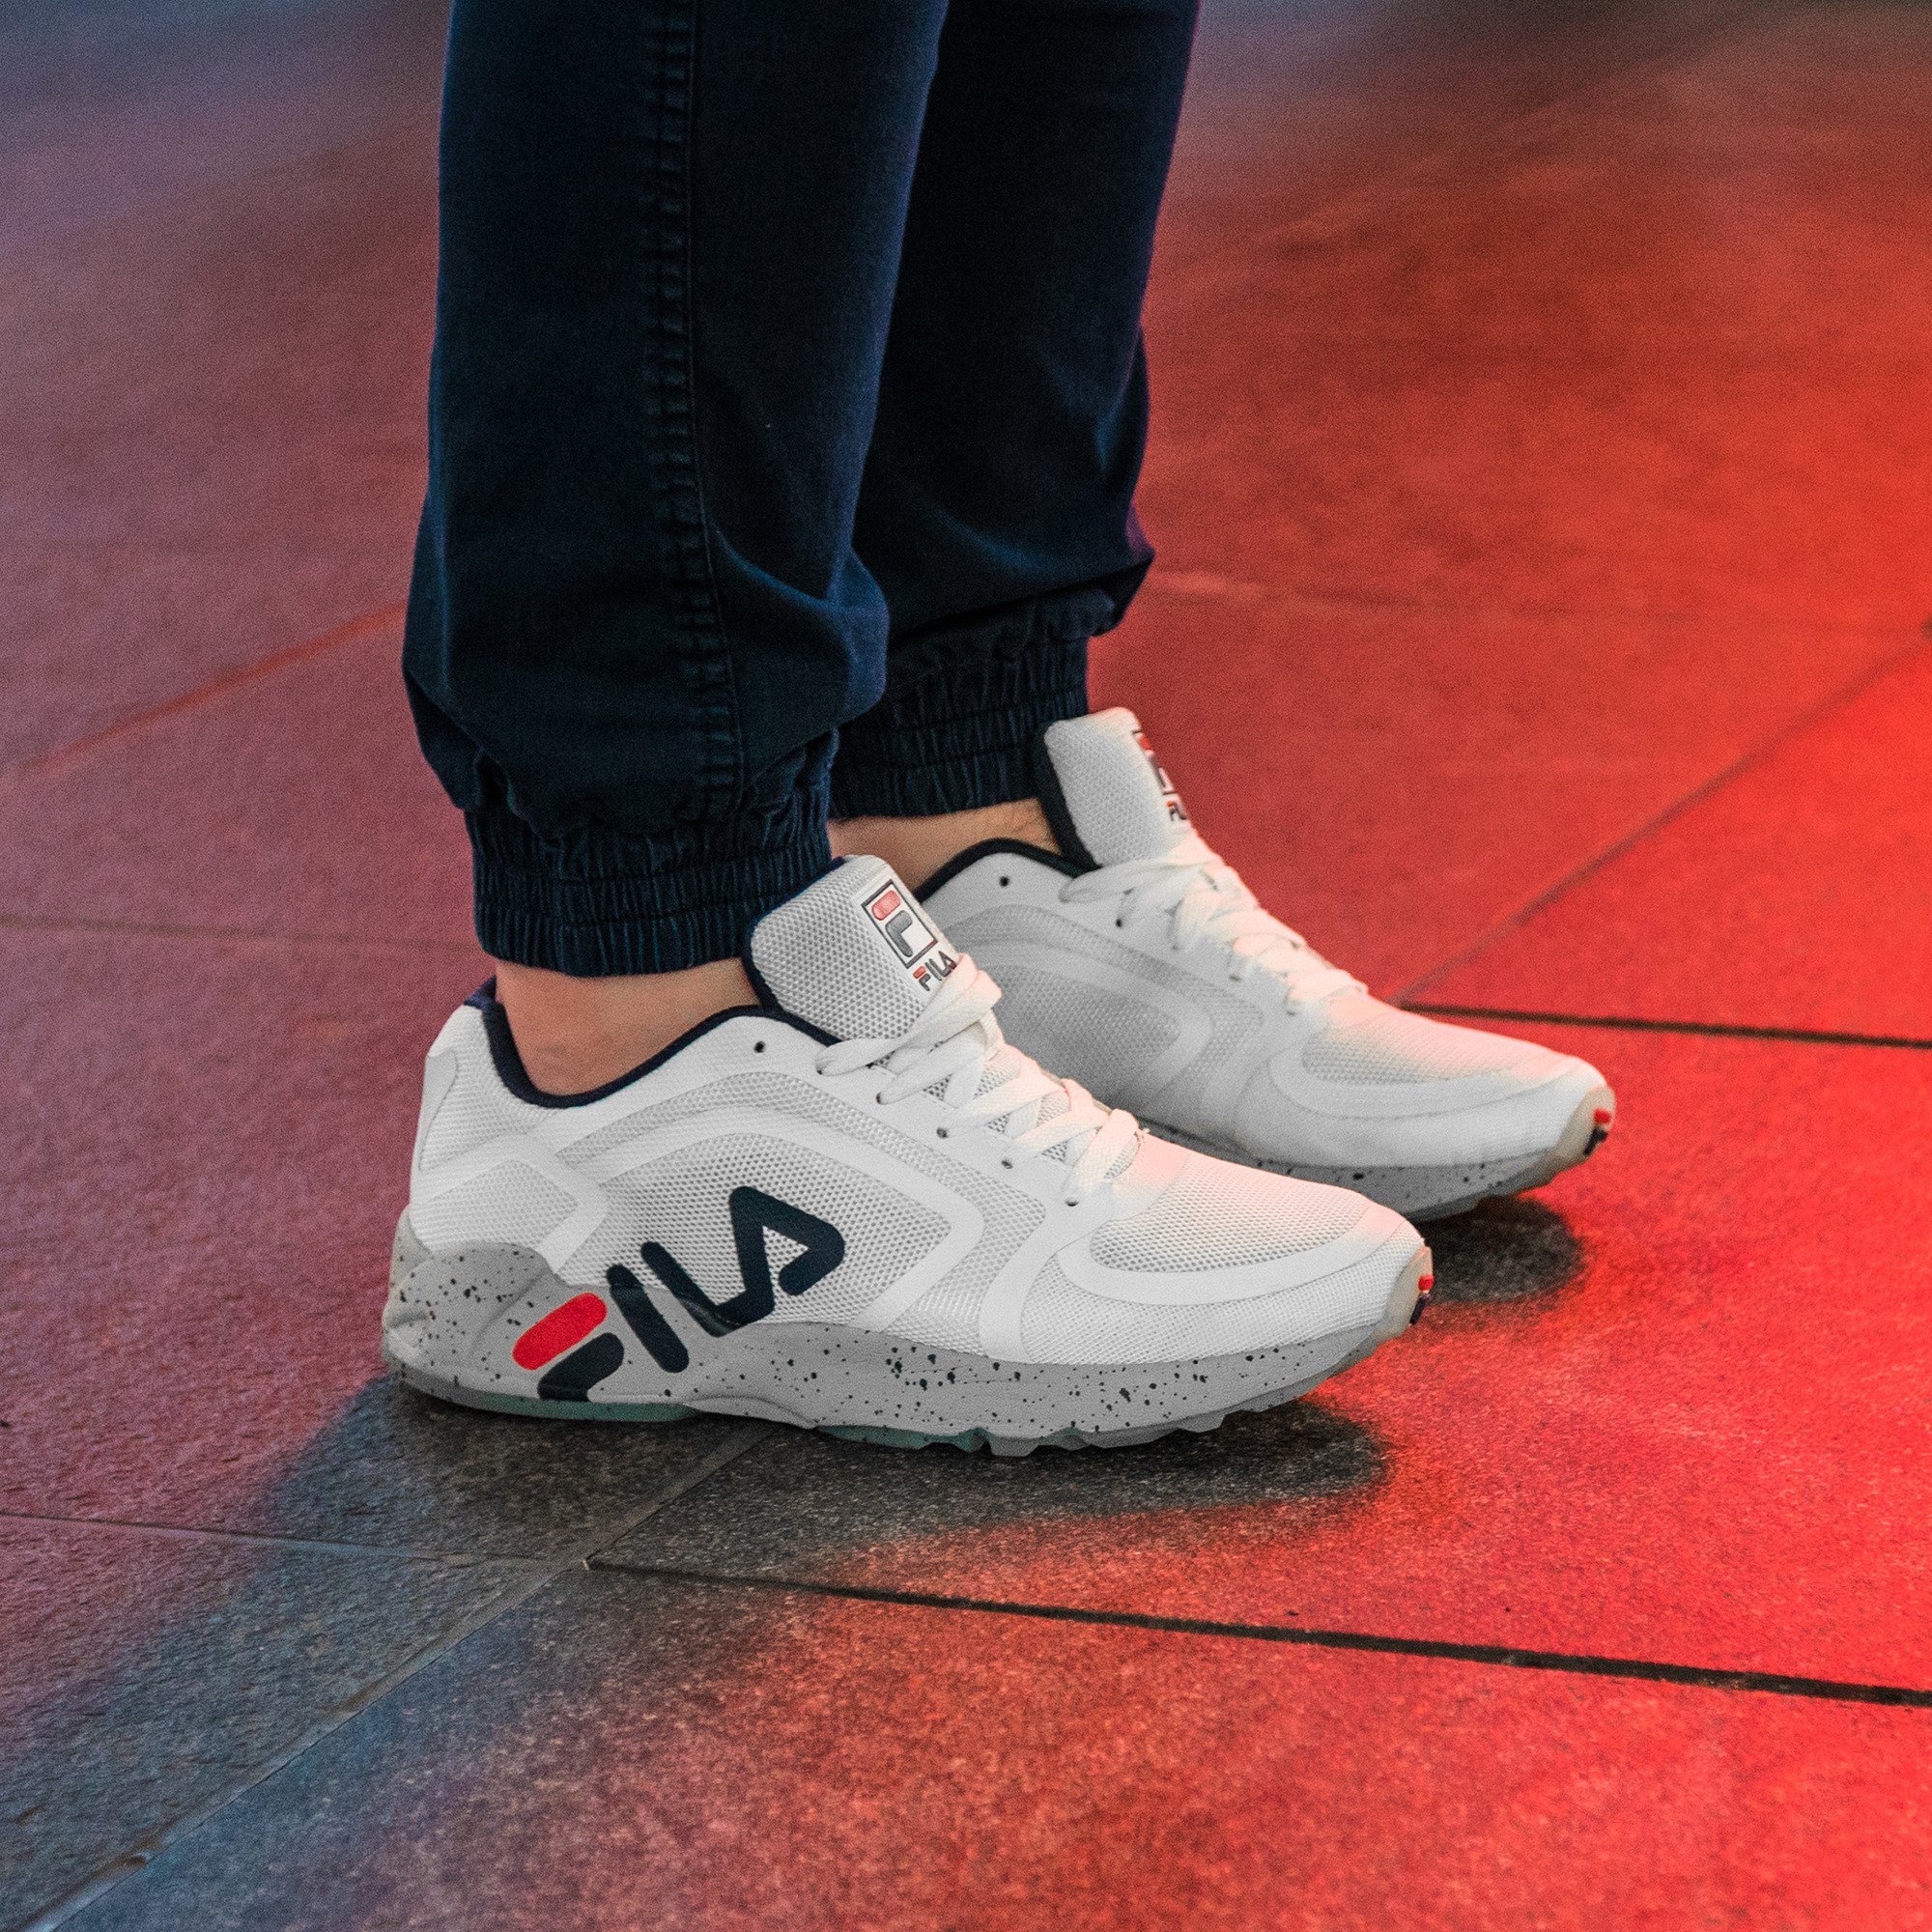 erupción Contratado Desesperado FILA en Twitter: "The @FILAUSA "Luminous" pack features the Mindbender F  and the Original Tennis 2.0. Available May 6th! https://t.co/dxzH65QPRr" /  Twitter